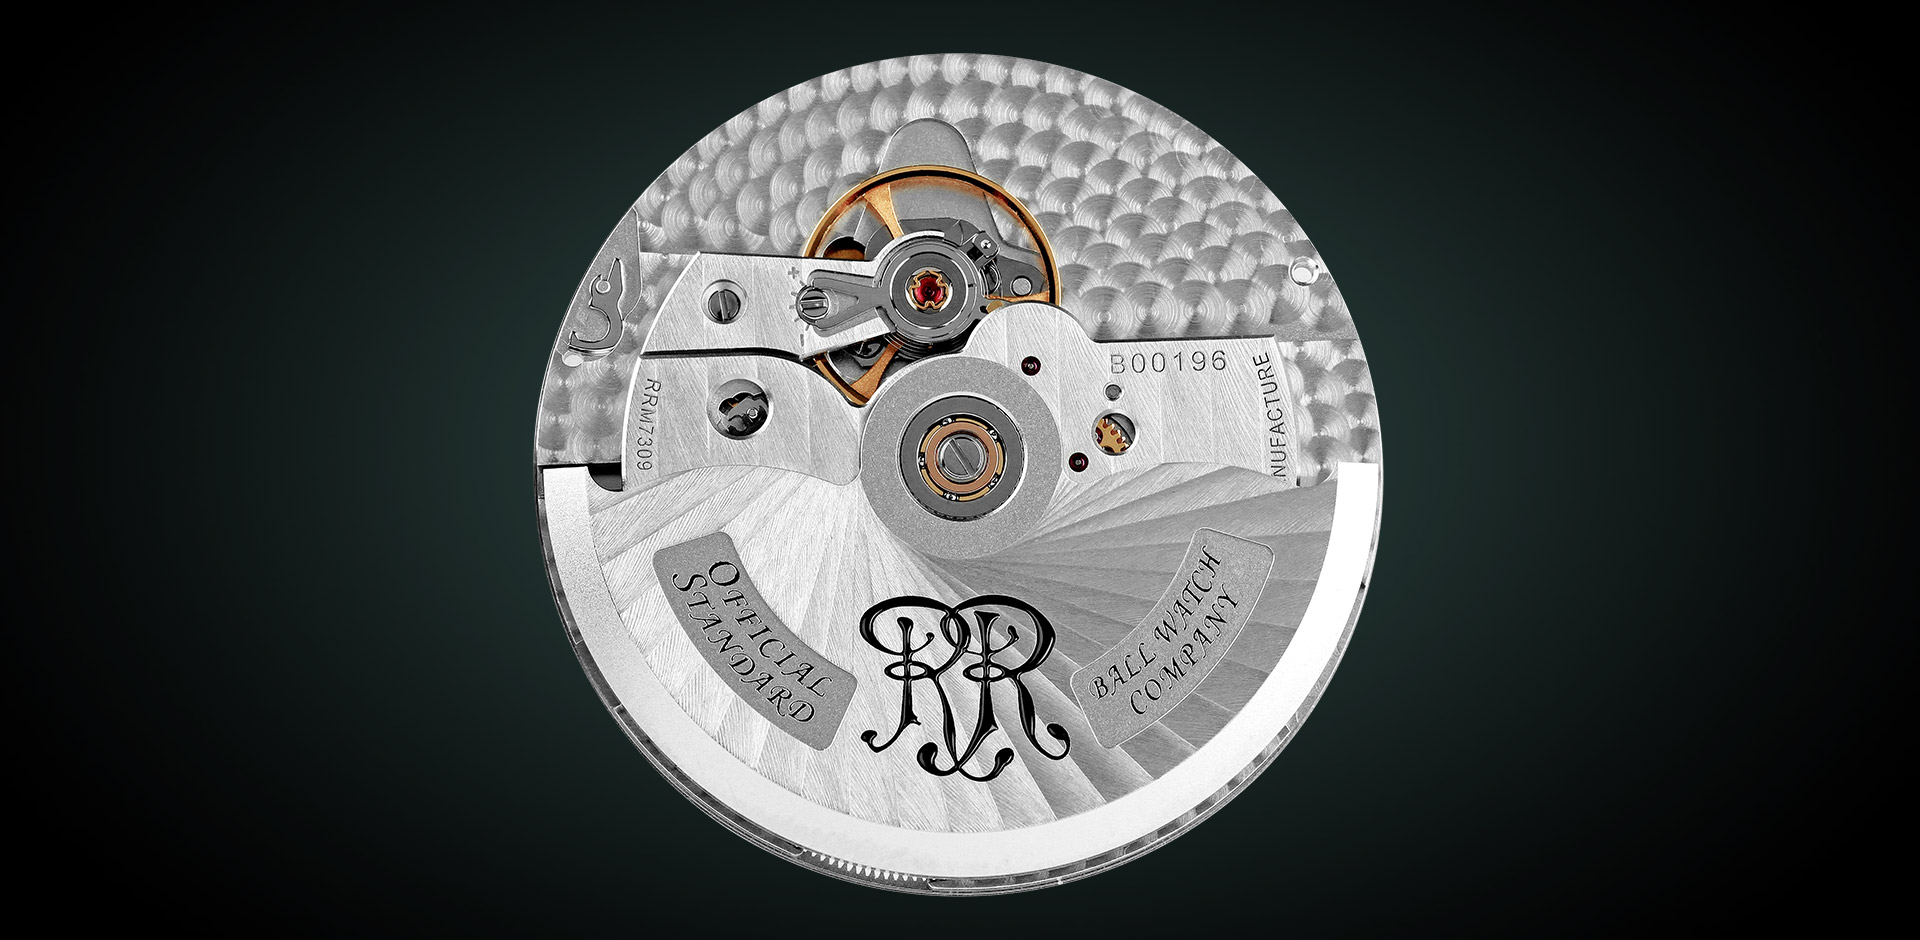 <p><strong>Rise to the challenge: Announcing our first chronometer manufacture caliber.</strong><br />
&nbsp;</p>

<table align="center" border="0" cellpadding="1" cellspacing="1" style="width:320px">
	<tbody>
		<tr>
			<td><a href="https://www.youtube.com/embed/1AoL8vnIl4A"><img alt="" src="http://www.ballwatch.com/global/images/technology/Chronometer%20Manufacture%20Caliber/Manufacture.gif" style="height:180px; width:320px" /></a></td>
		</tr>
	</tbody>
</table>

<p><br />
Always do what you are afraid to do.<br />
Take on the risk that some think you won&rsquo;t.<br />
And persevere when others say you can&rsquo;t.<br />
There will be difficulties. There will be doubt.<br />
But there will also be victories.<br />
To be great is to sometimes be misunderstood.<br />
You can overcome anything and everything<br />
when courage leads your every step.<br />
When ambition, hard work and resiliency refuse to give up.<br />
Whatever path you take,<br />
never let fear stand in the way of your dreams.<br />
And never stop until you rise to the challenge.<br />
&nbsp;</p>
